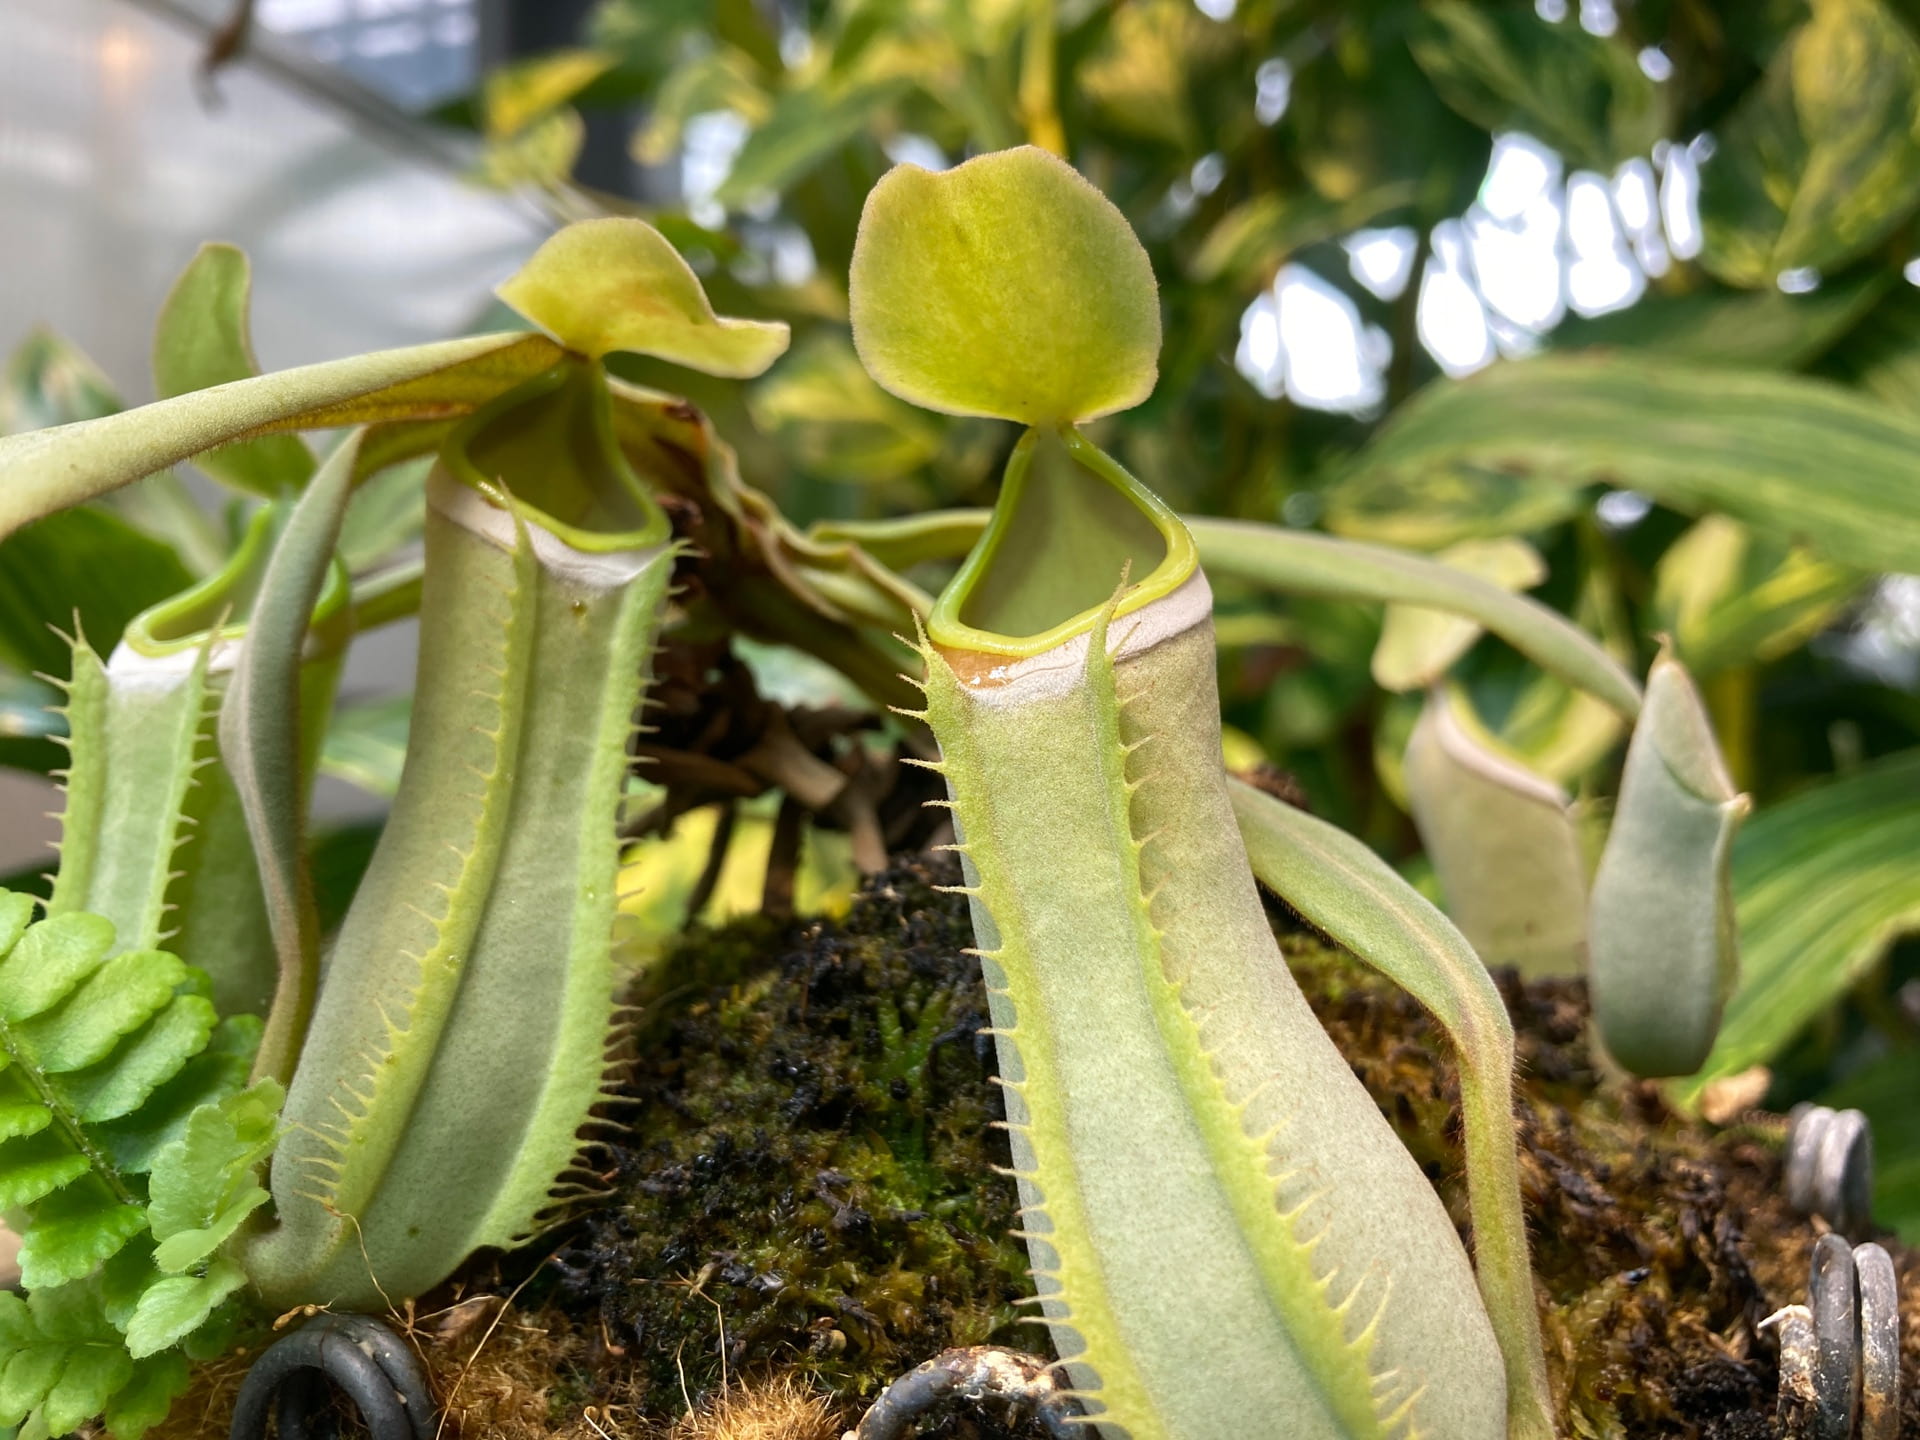 Passive carnivorous traps, seen in Nepenthes spp., Sarracinea spp., Heliamphor spp, and Cephalotus spp., lure prey into the modified leaves (seen here as a pitcher). They cannot escape the slippery interior and are digested by an enzyme.